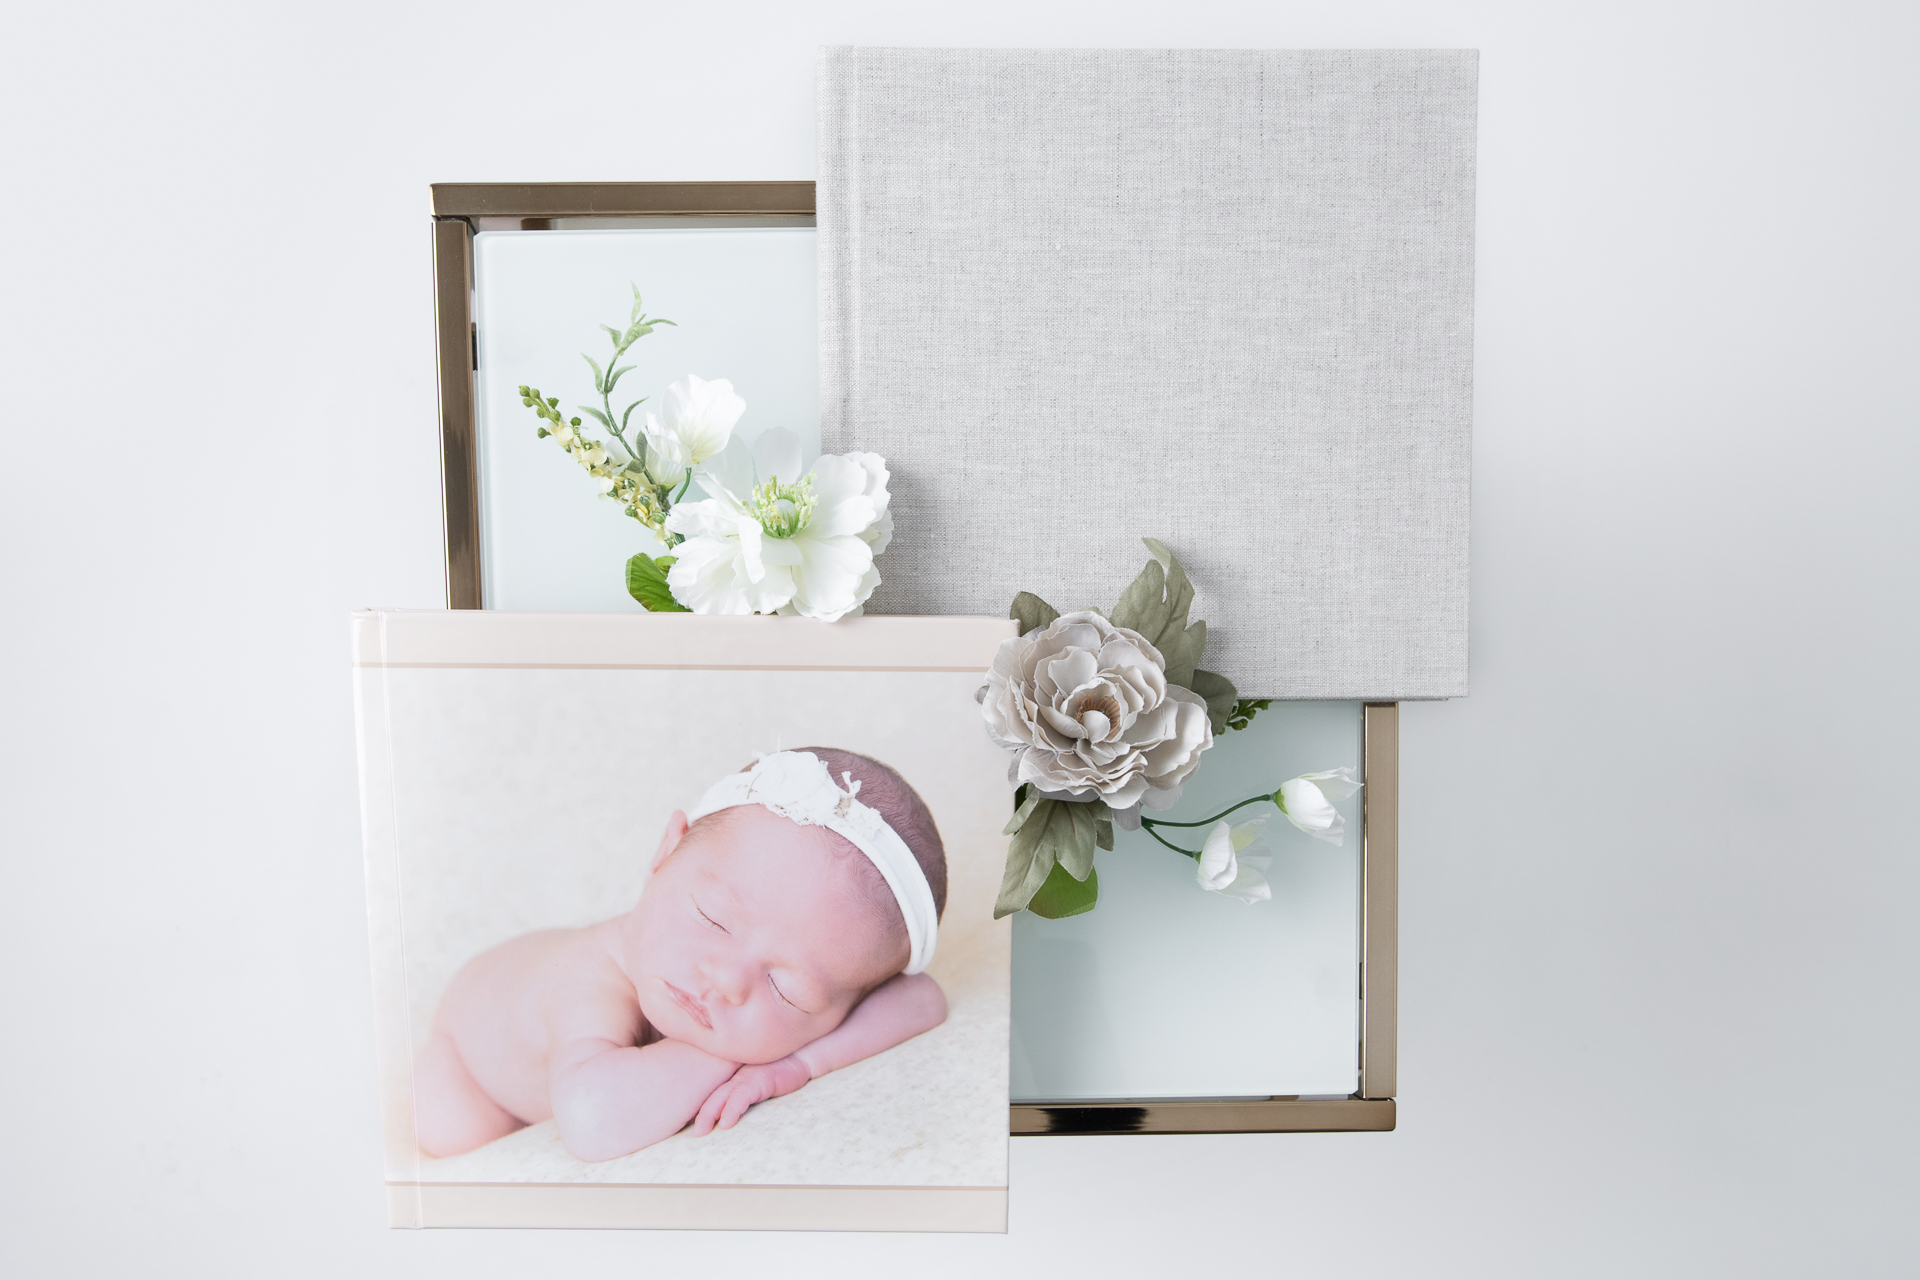 Two photo albums on glass table. One shows a newborn posing on its cover. Flowers decorating